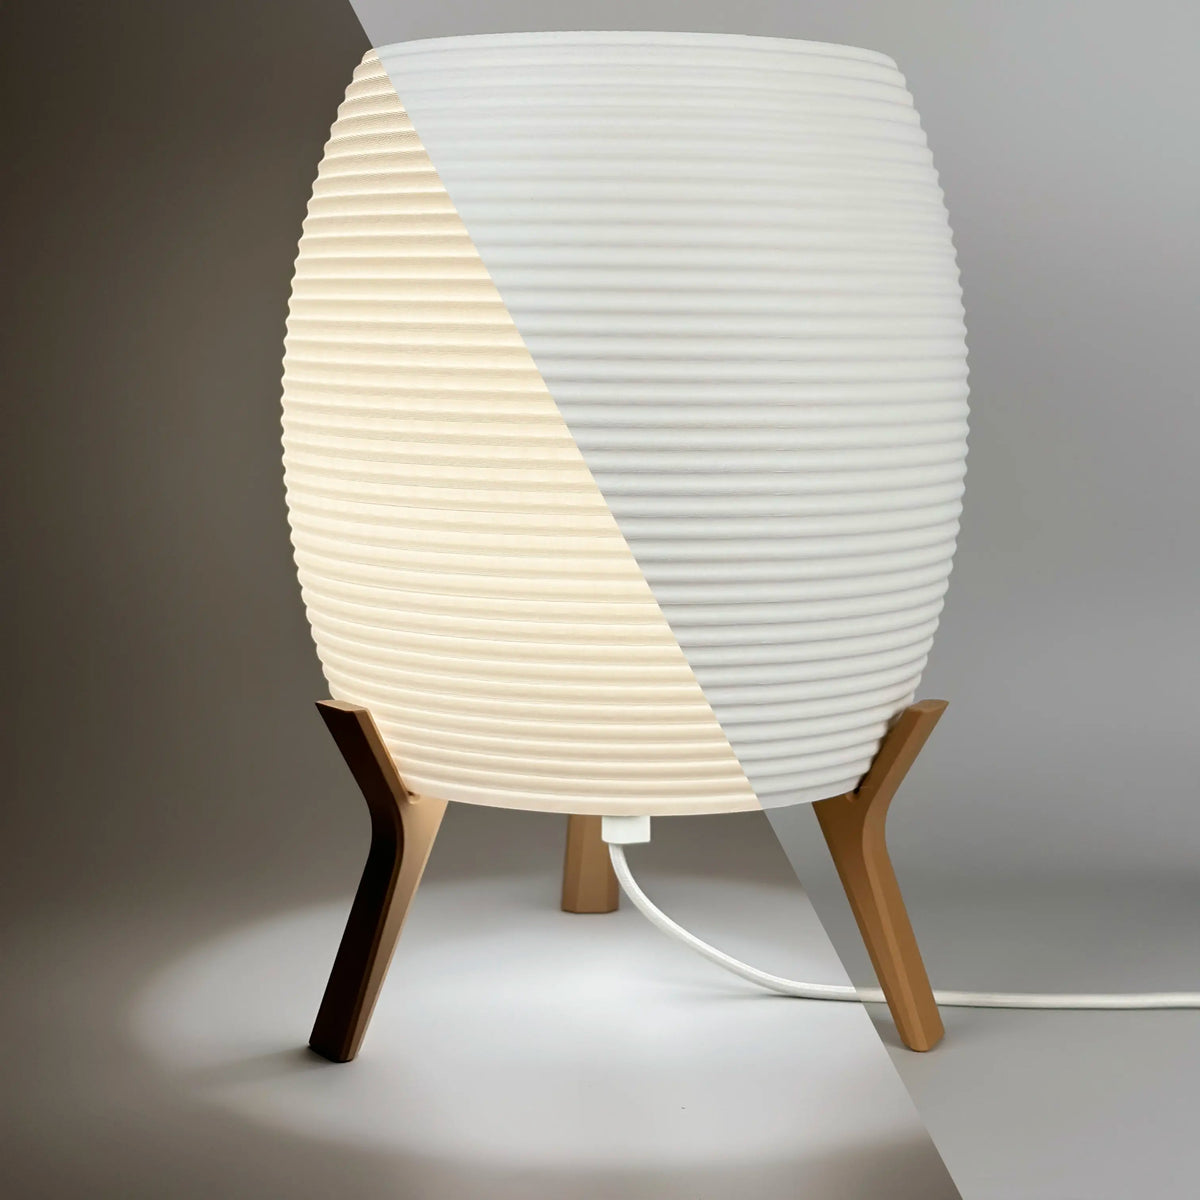 MinimalElegance Curve Table Lamp - Minimalist Bedside lamp in cotton white shade and wood brown base. Half image on and half image off.